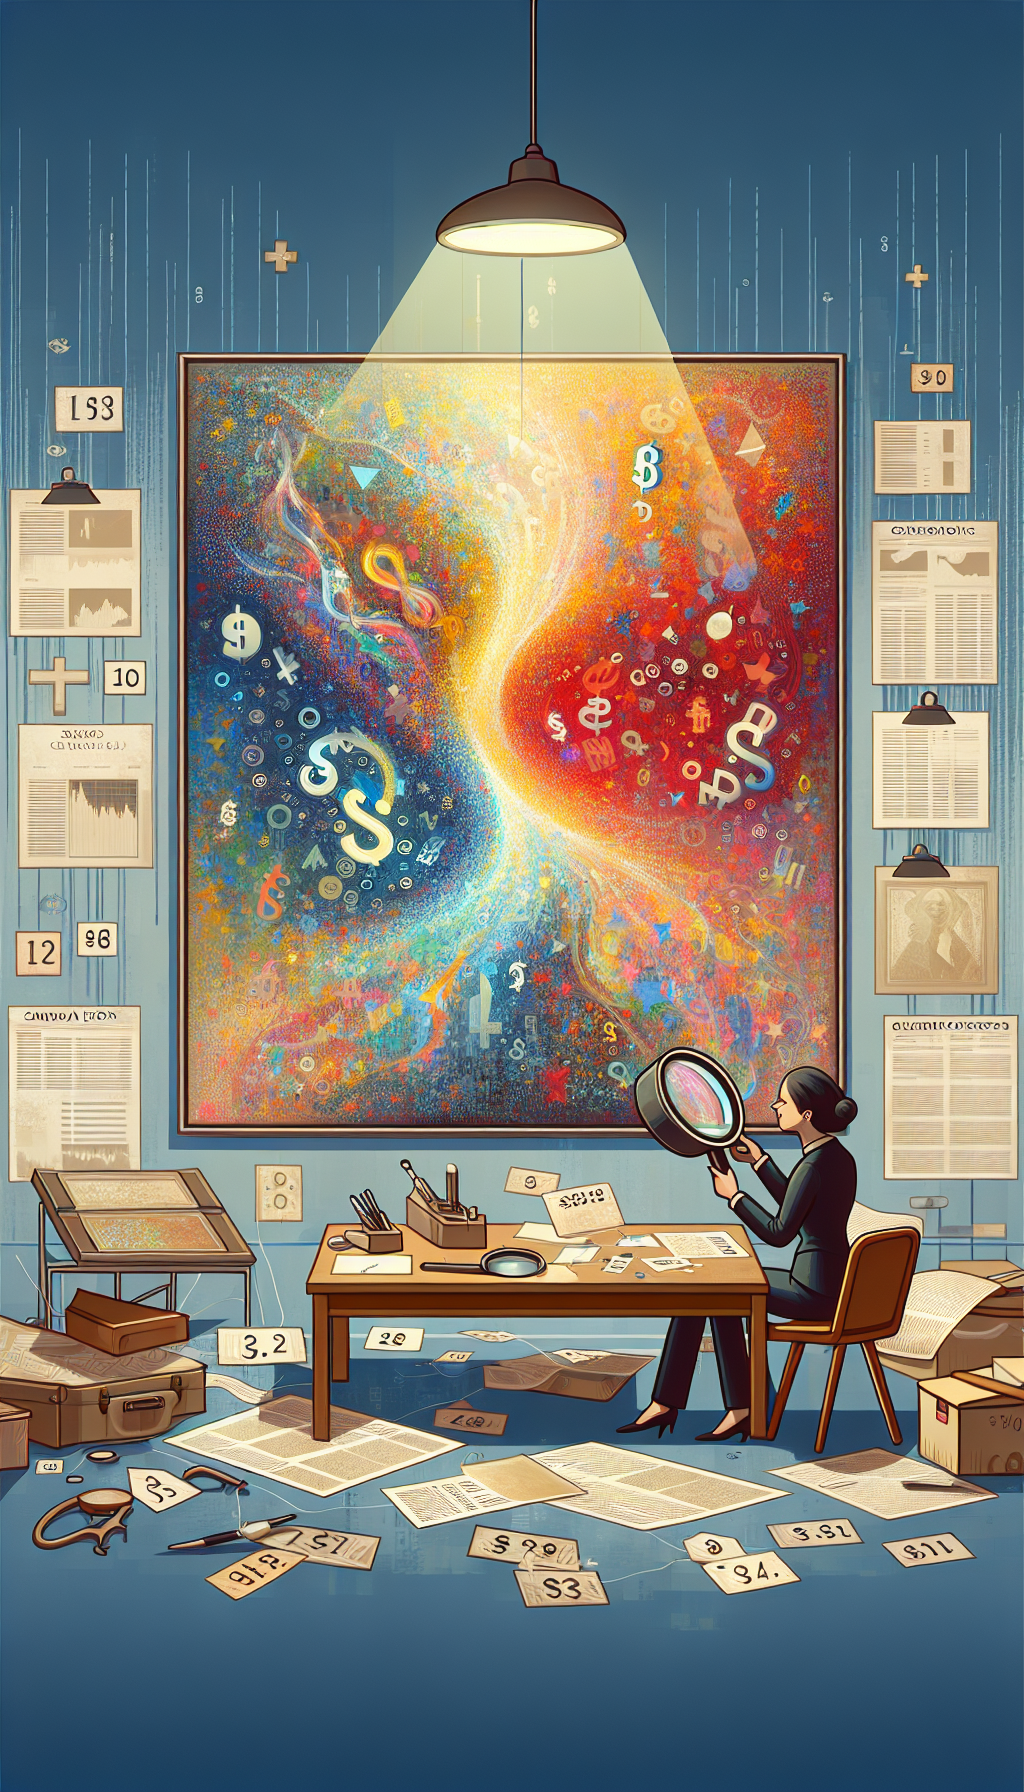 An illustration features an art appraiser with a magnifying glass examining a vibrant, abstract painting, various appraisal tools like condition reports and auction catalogs scattered around. The painting seemingly transitions into a shimmering mosaic of price tags and currency symbols, blending the artwork's intrinsic value with its market price – a visual metaphor contrasting the measurable with the immeasurable in art appraisal.